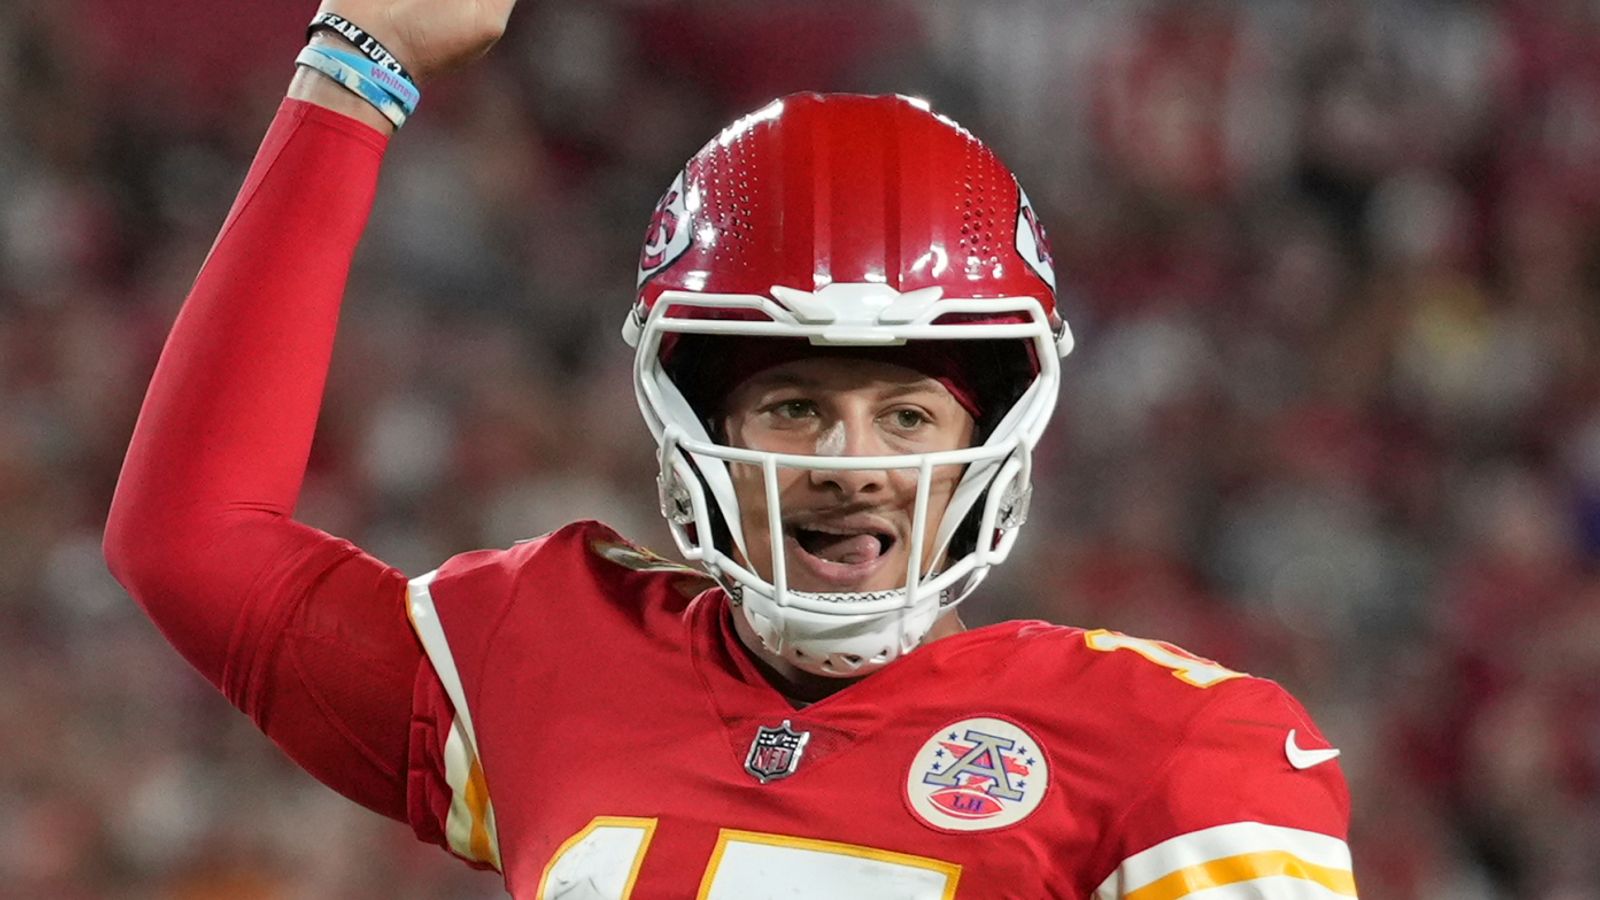 Patrick Mahomes’ fantasy magic, NFL in London reaction and the quarterback carousel spinning